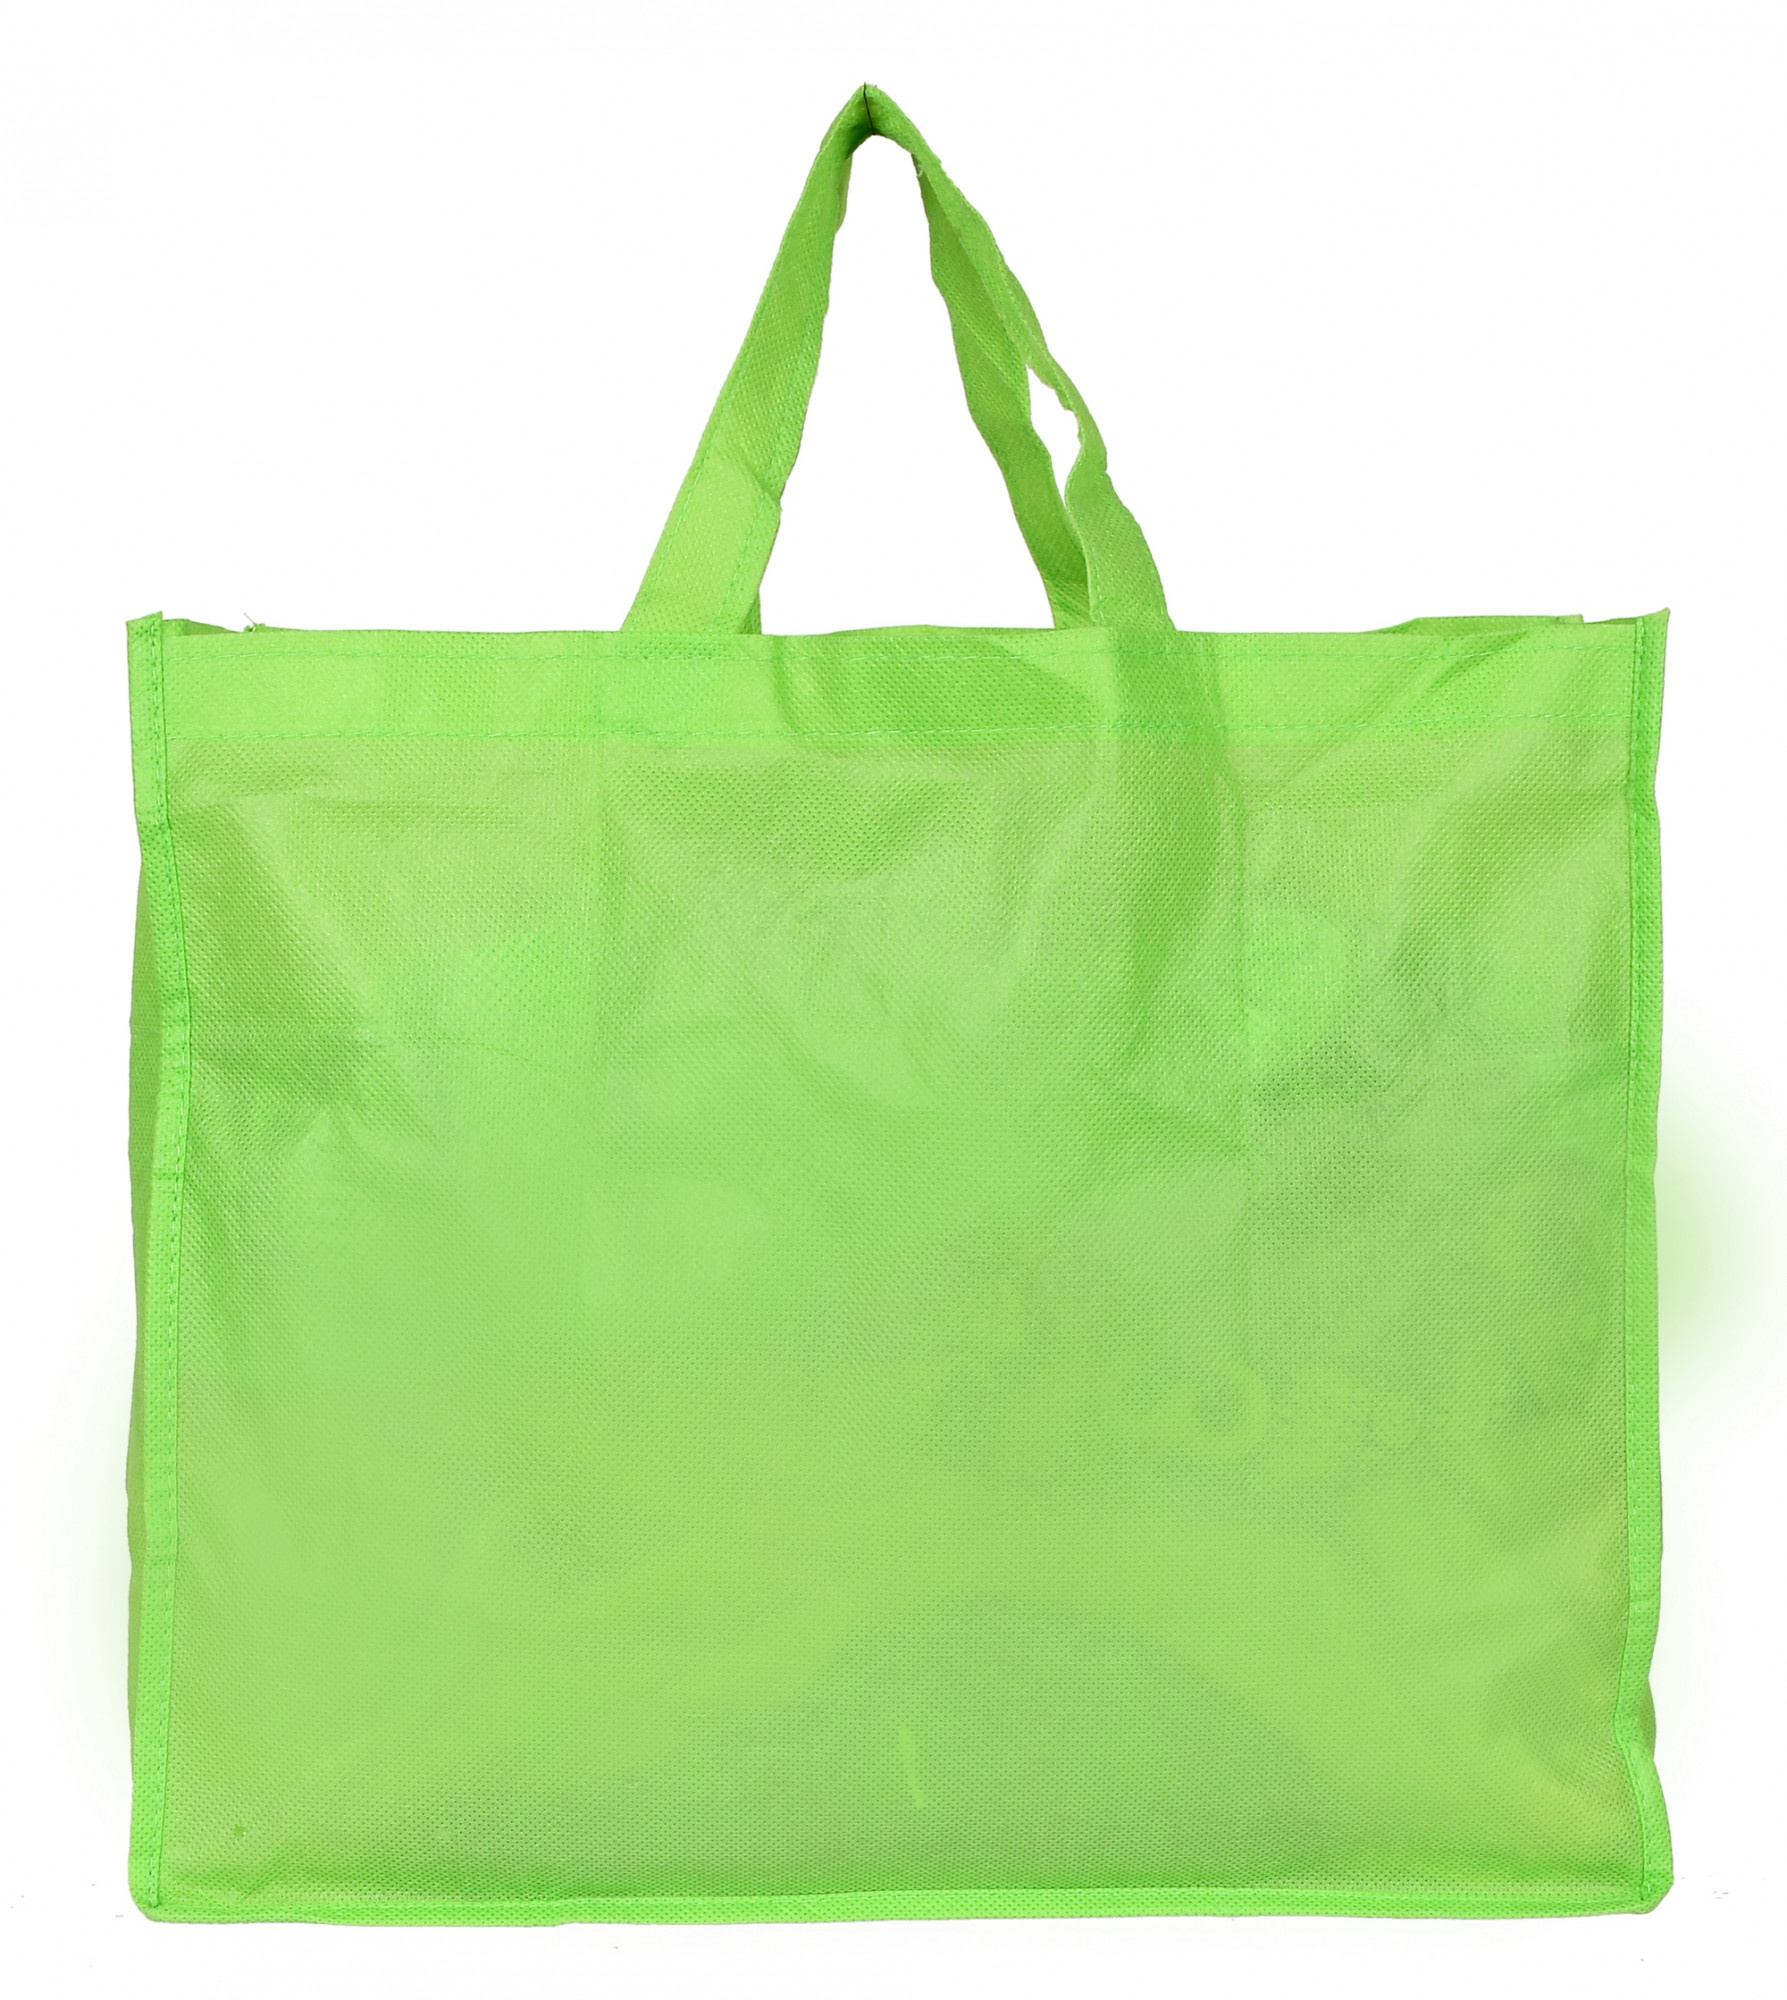 Kuber Industries Shopping Grocery Bags Foldable, Washable Grocery Tote Bag with One Small Pocket, Eco-Friendly Purse Bag Fits in Pocket Waterproof & Lightweight (Green)